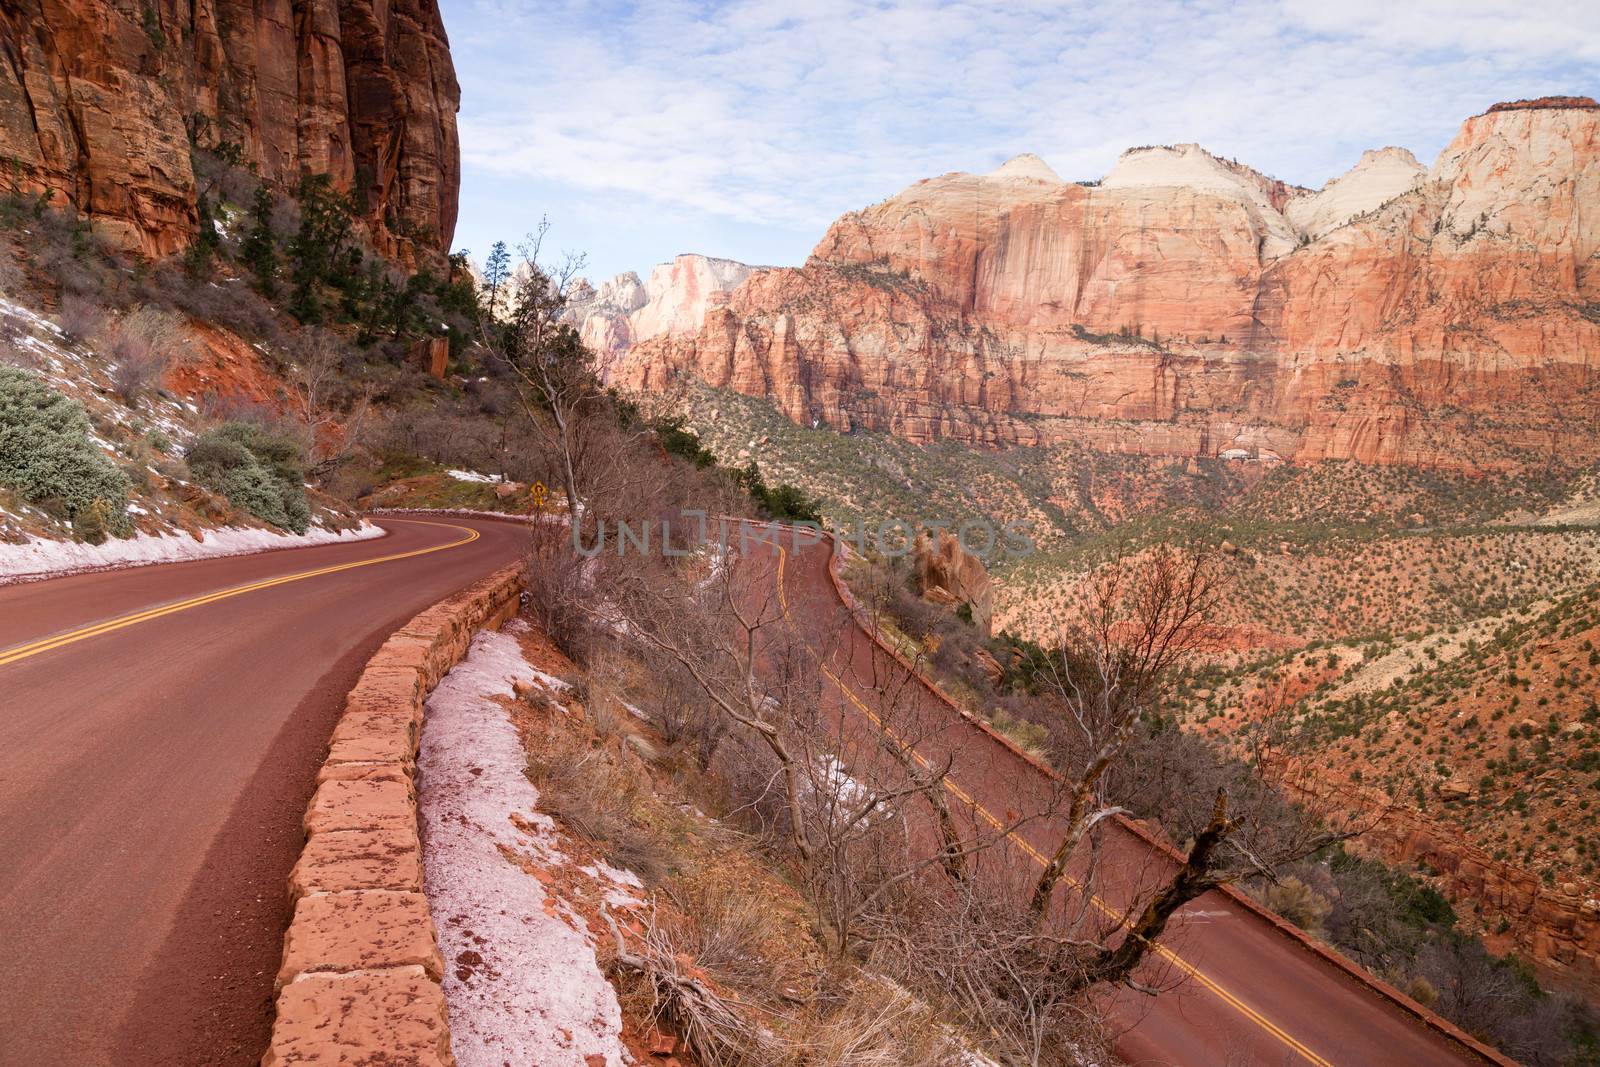 Highway 9 Zion Park Blvd Curves Through Rock Mountains by ChrisBoswell